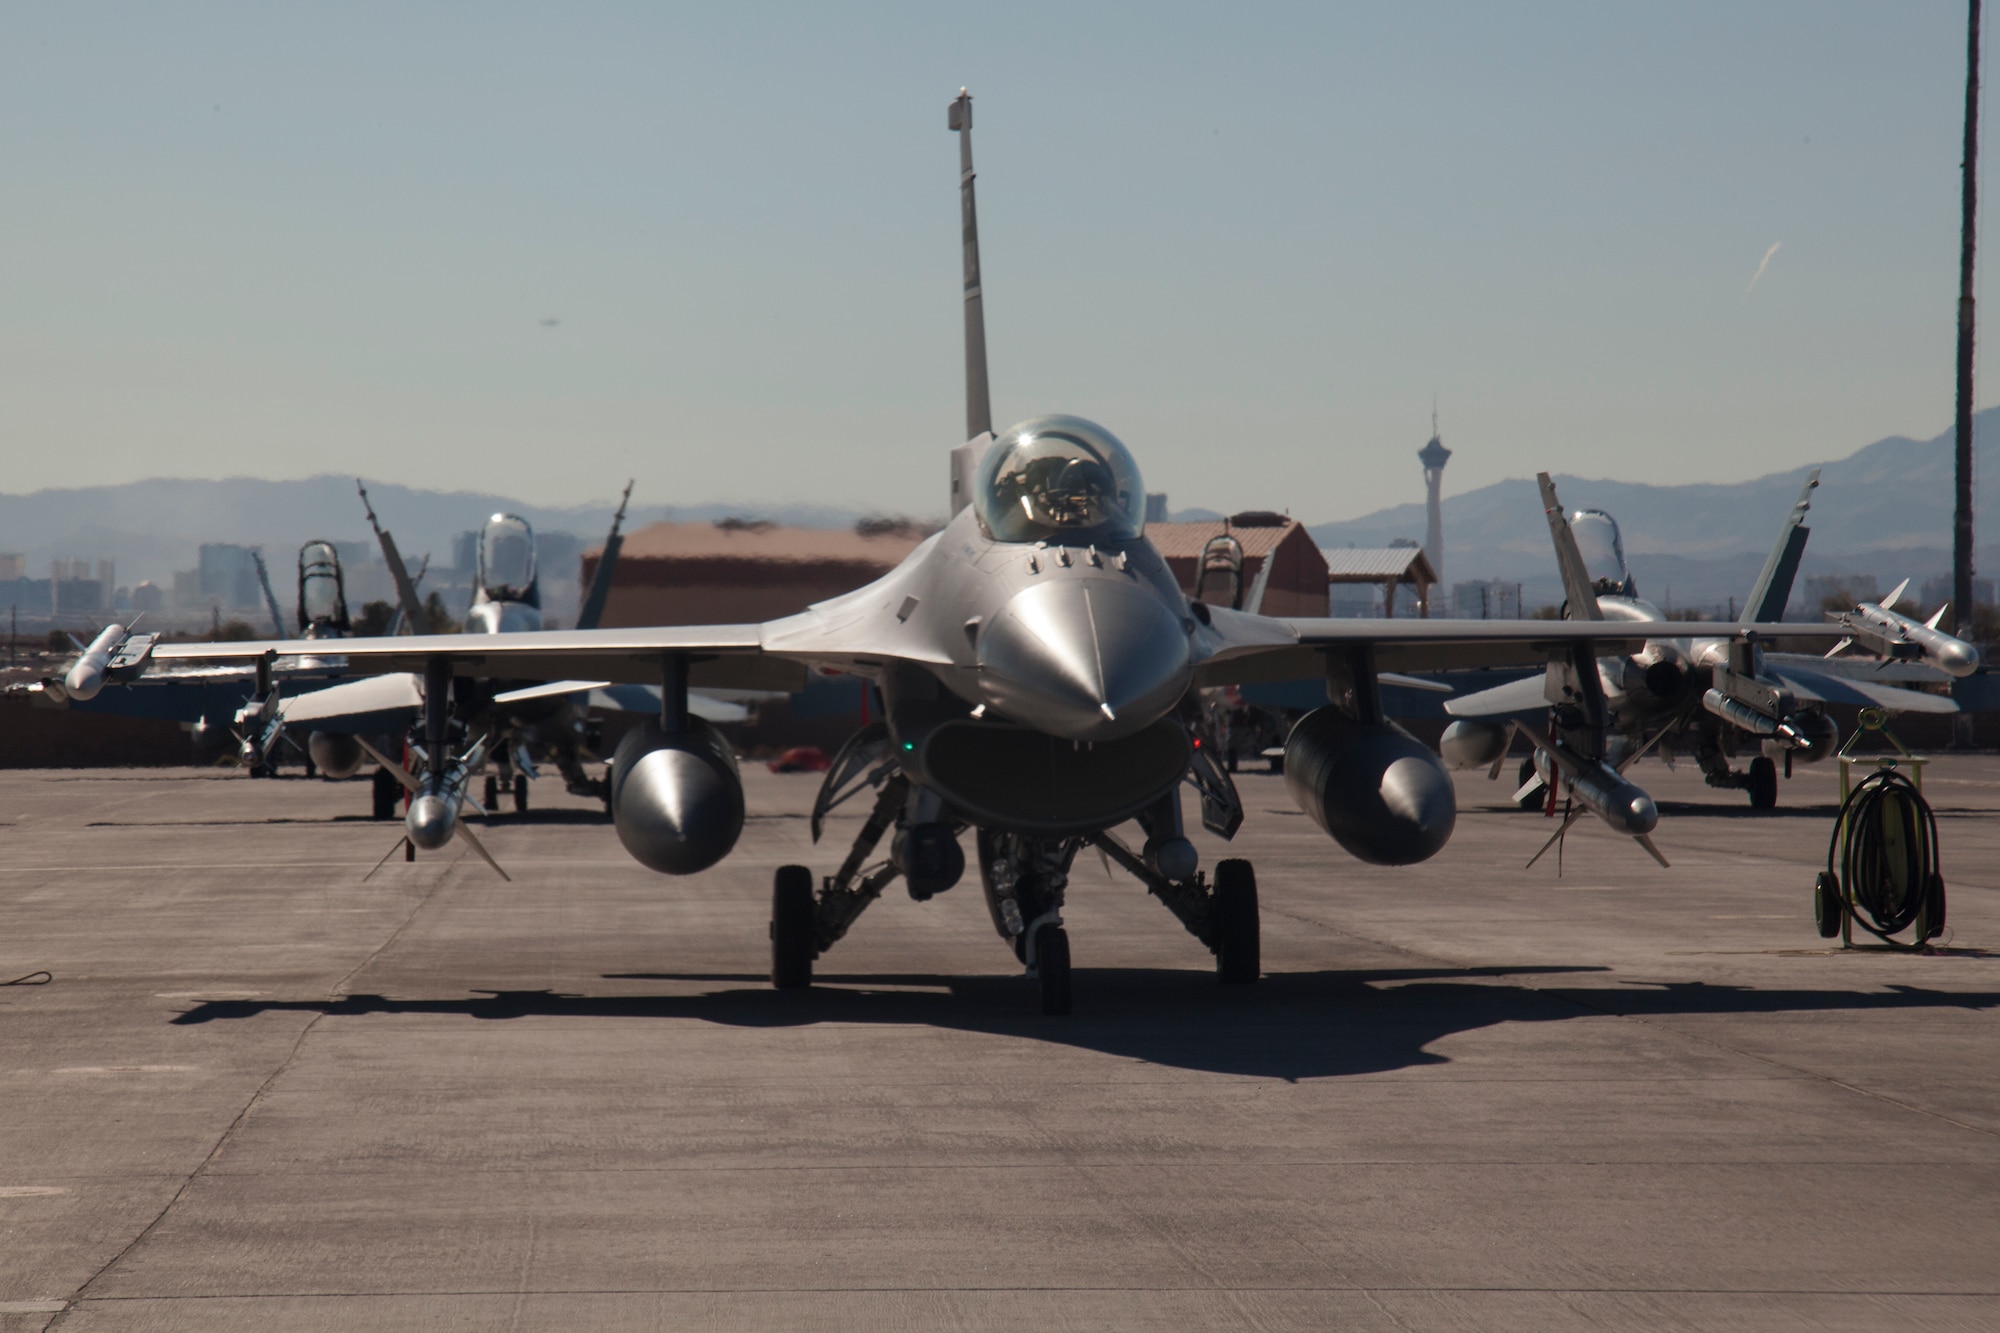 An F-16 Fighting Falcon assigned to the 157th Fighter Squadron, McEntire Joint National Guard Base, S.C., is parked on the Nellis Air Force Base flight line Jan. 26, 2016, during exercise Red Flag 16-1. F-16 Fighting Falcons, along with approximately 30 other airframes, are participating in the advanced training program administered by the United States Warfare Center and executed through the 414th Combat Training Squadron, both located at Nellis Air Force Base. (U.S. Air Force photo by Master Sgt. Burt Traynor/Released)